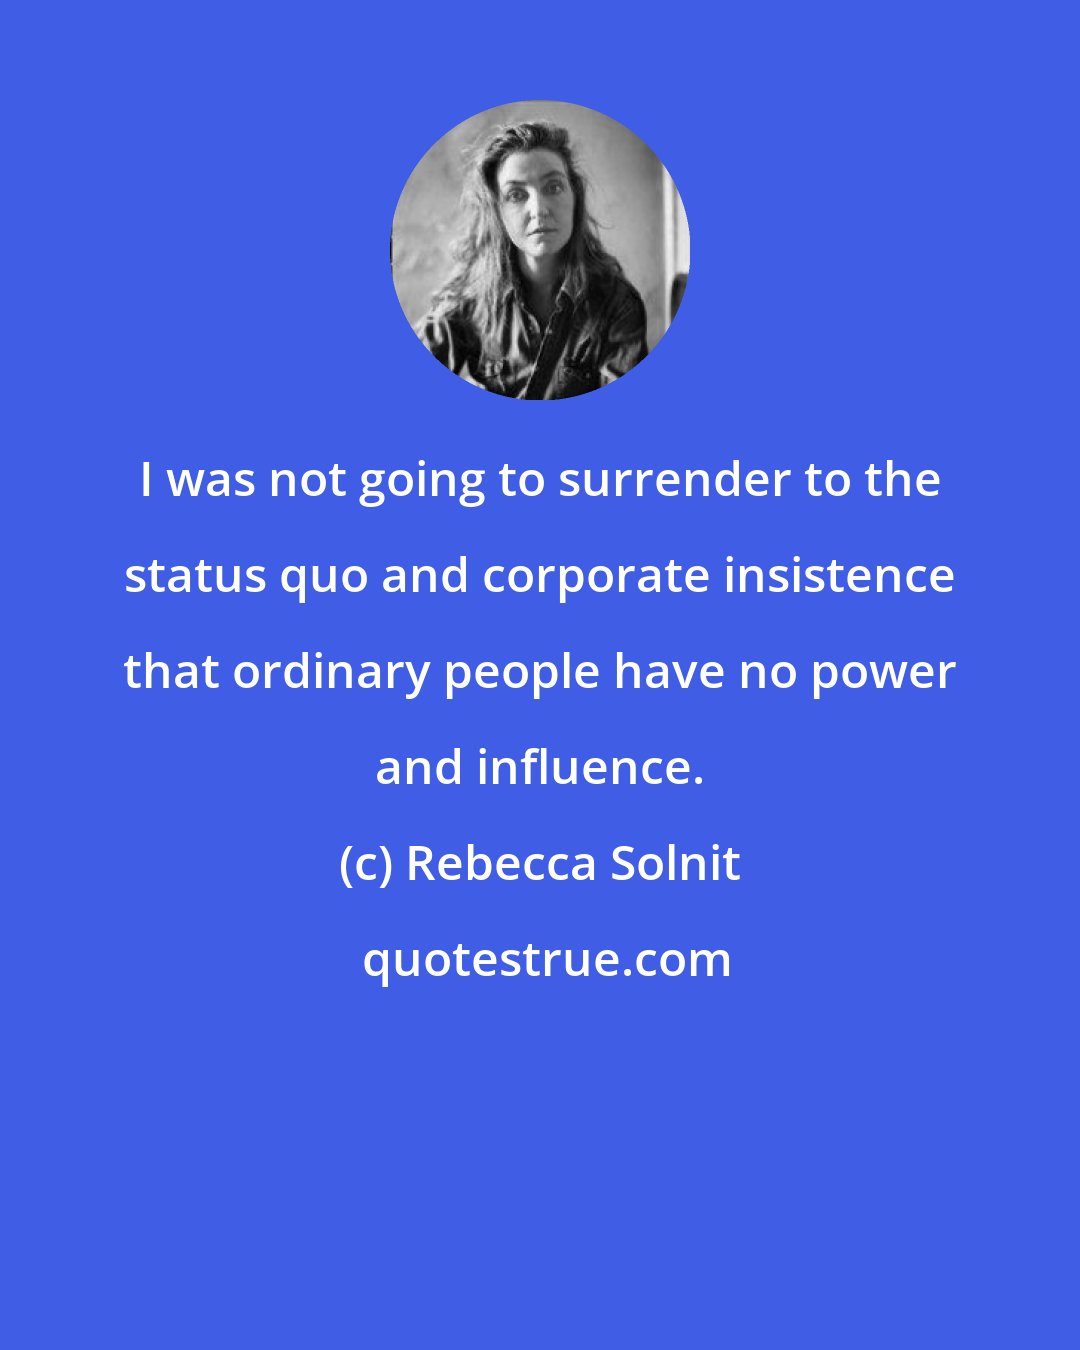 Rebecca Solnit: I was not going to surrender to the status quo and corporate insistence that ordinary people have no power and influence.